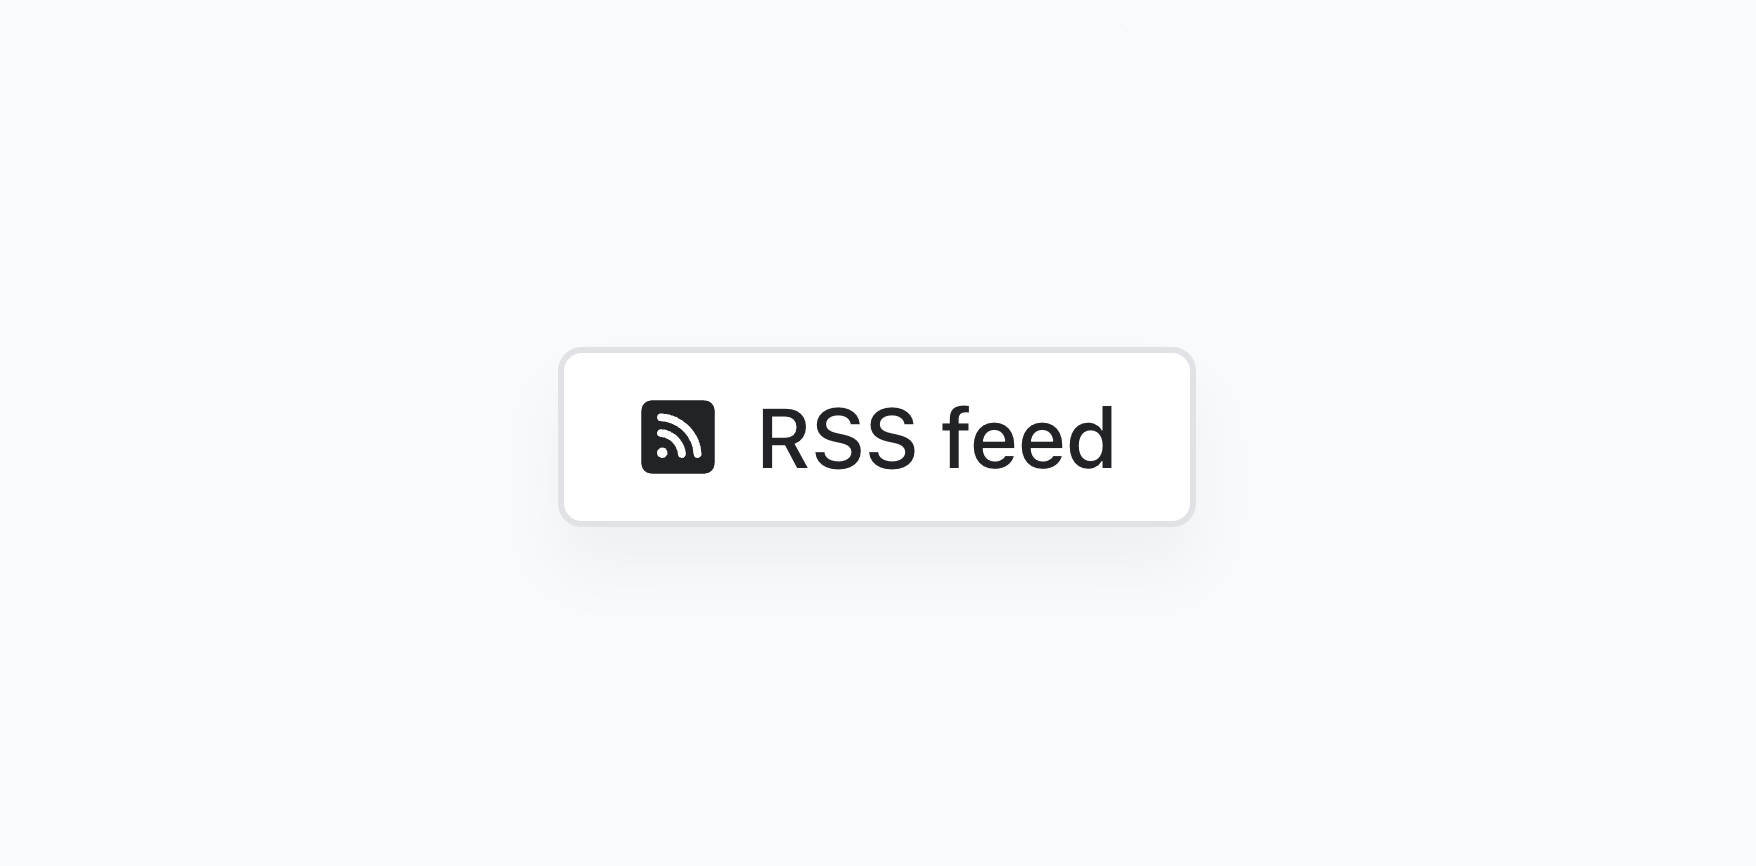 RSS feed